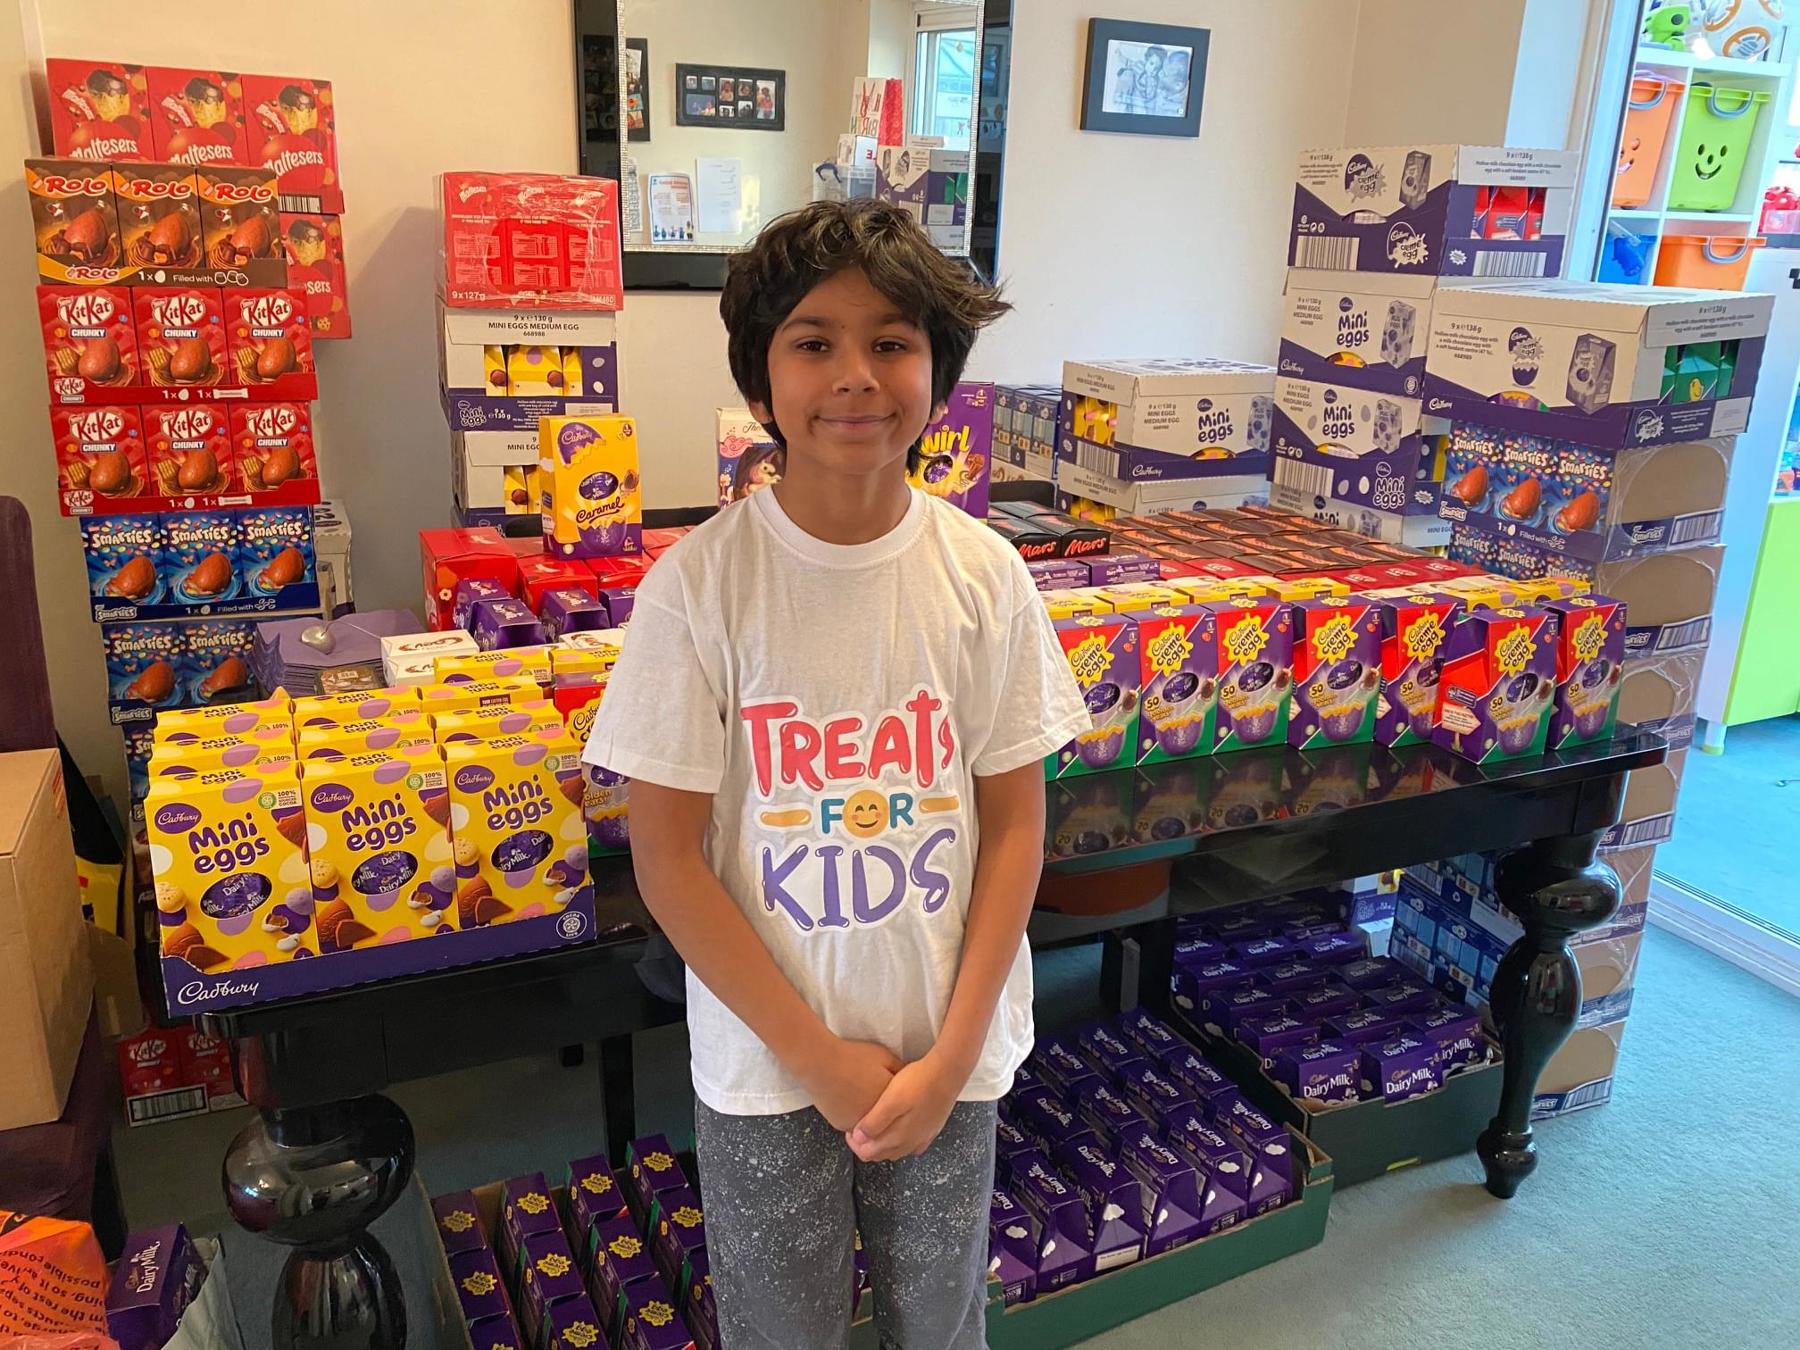 Neo is stood in front of lots of Easter eggs, and he is smiling. They are behind him on tables.